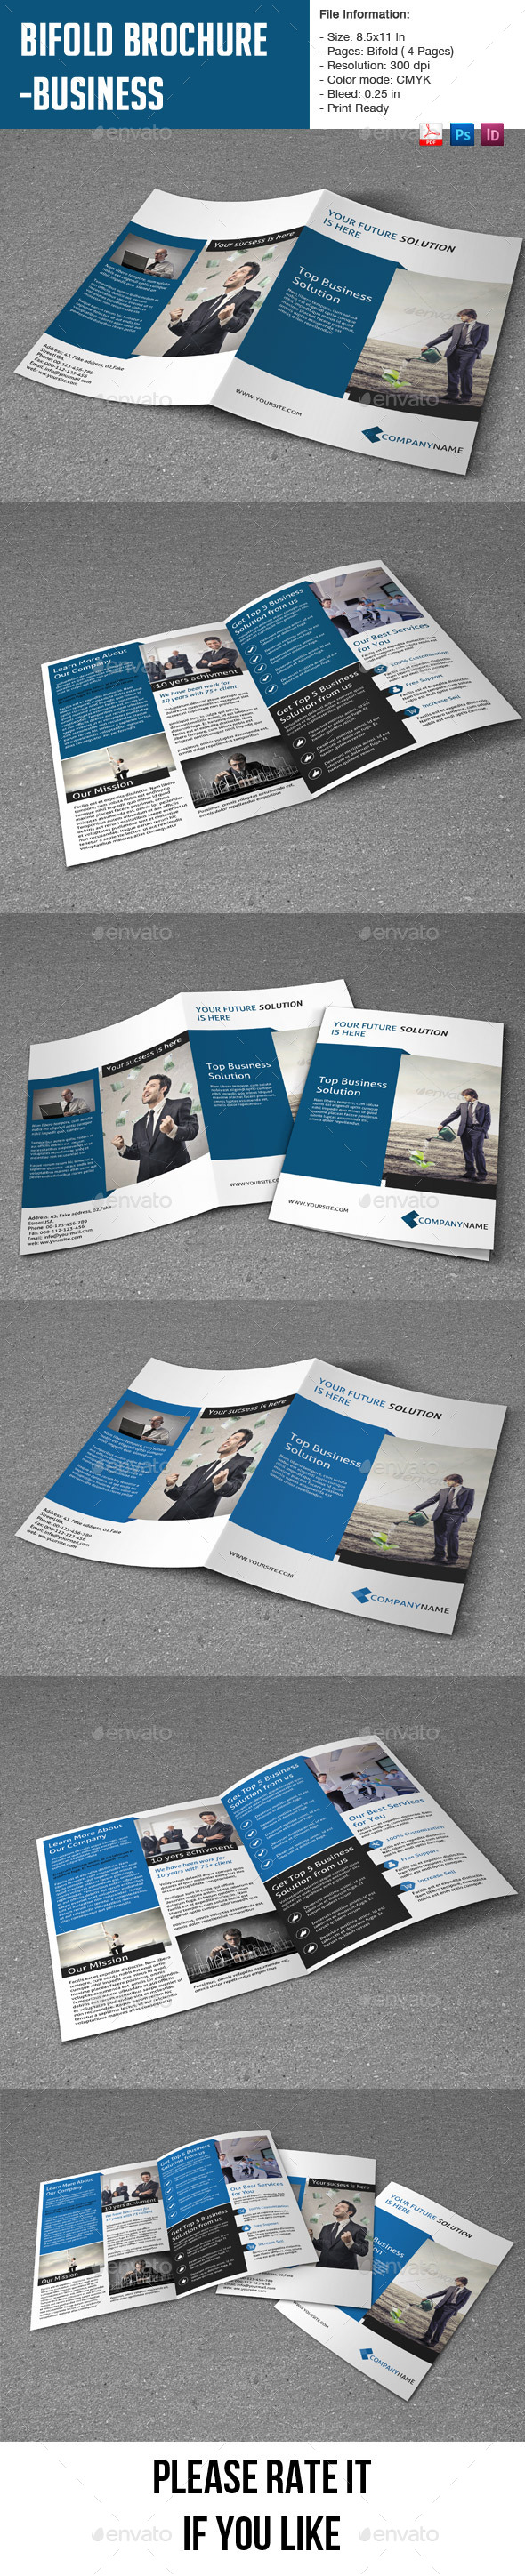 Bifold Brochure for Business-4 pages